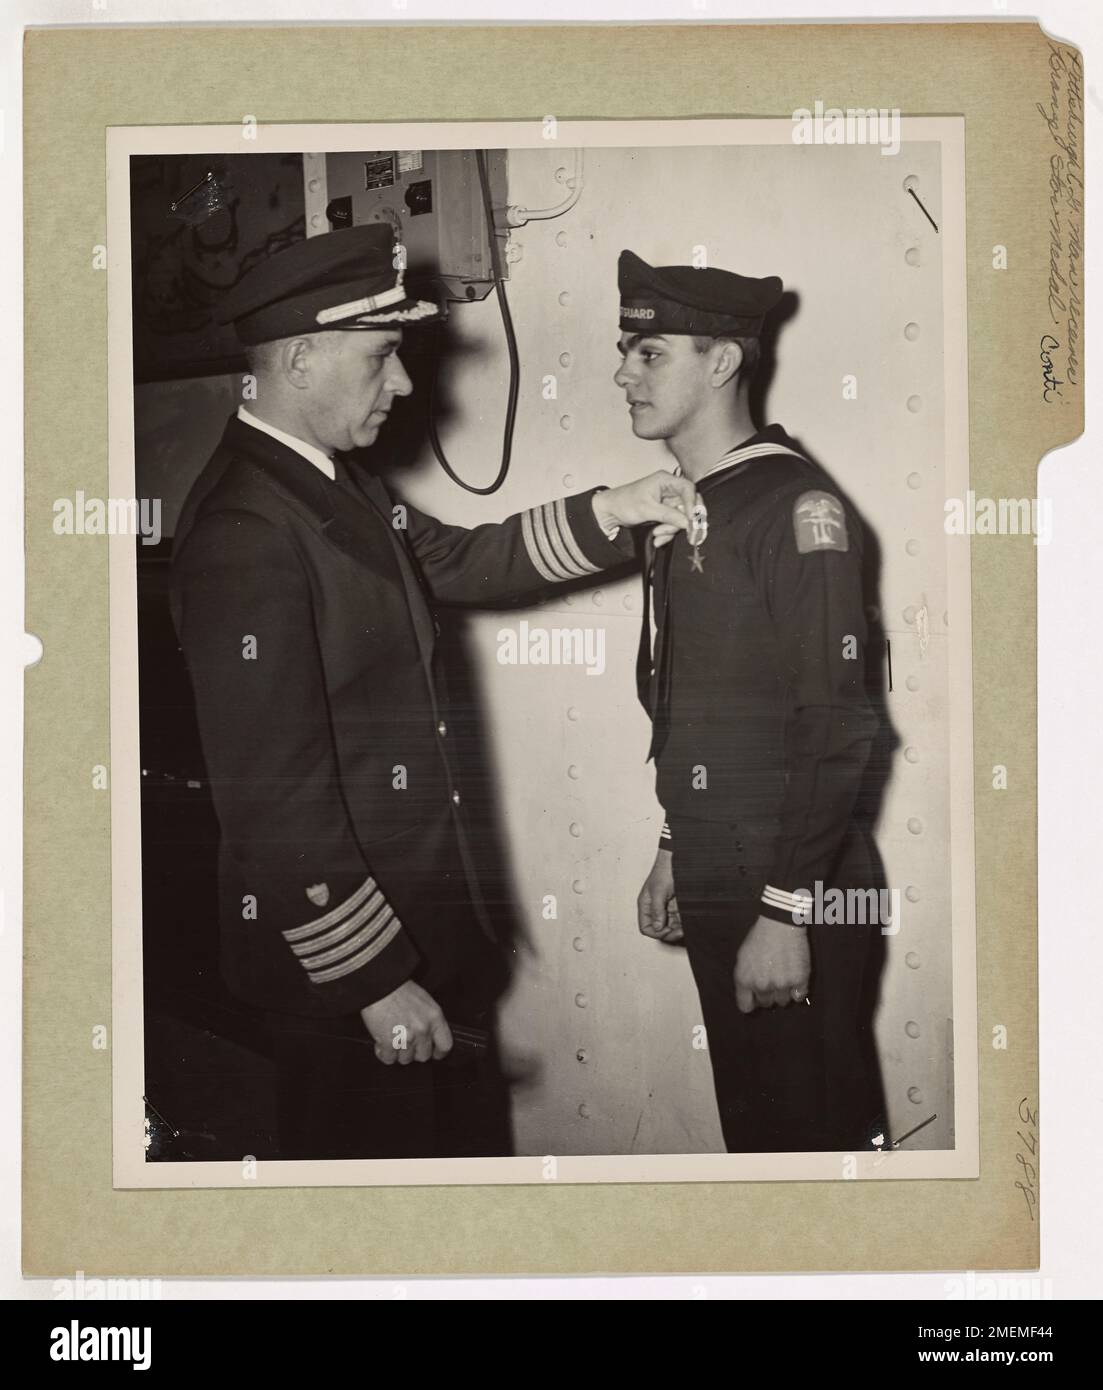 Pittsburgh Coast Guardsman Awarded Bronze Star Medal. Cited in the name of the President by Admiral Harold R. Stark, Commander of U. S. Naval forces in Europe, Coast Guardsman Edward P. Conti, Coxswain, of 219 Pearl Street, Pittsburgh, PA., is presented with the Bronze Star Medal by Captain Frank A. Leamy, 62 Woodmont Road, Belle Haven, Alexandria, VA. Serving as the Coxswain of a landing barge off the Coast Guard-manned invasion transport on which he was assigned, Coast Guardsman Conti rescued the entire troop detachment of a sinking LCI after debarking his own troops and fetching to other st Stock Photo